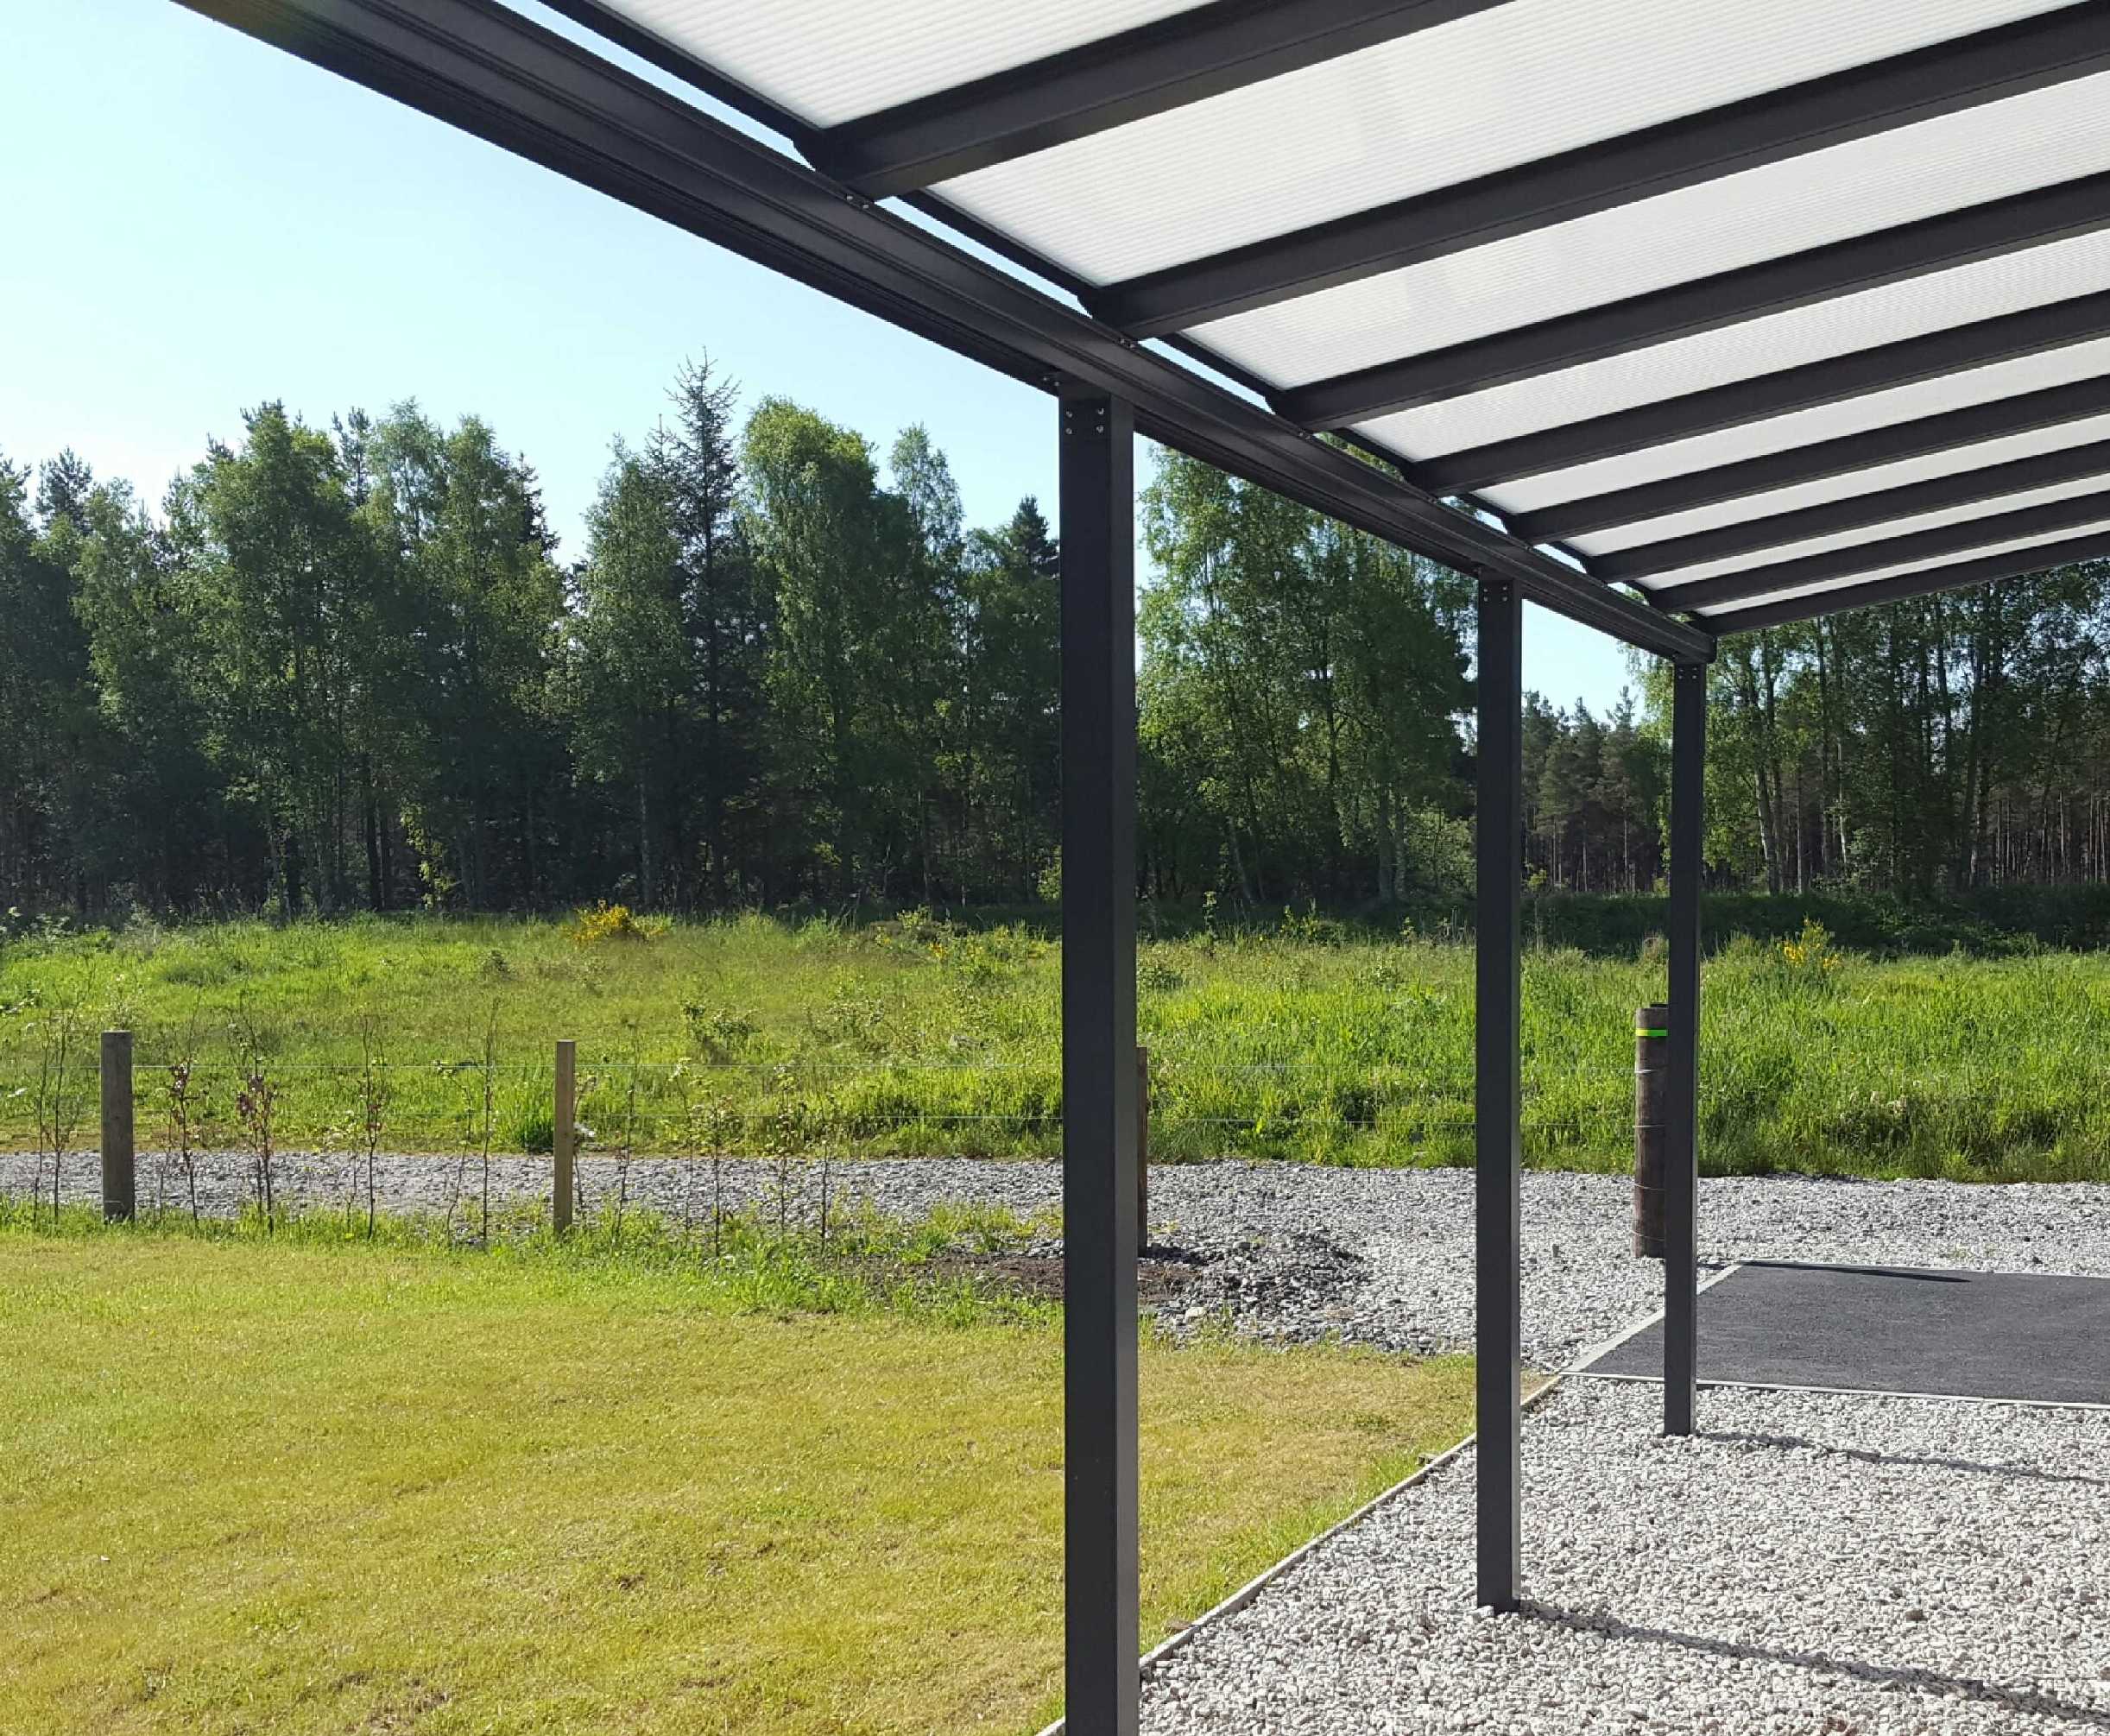 Omega Smart Lean-To Canopy, Anthracite Grey, 6mm Glass Clear Plate Polycarbonate Glazing - 6.3m (W) x 3.5m (P), (4) Supporting Posts